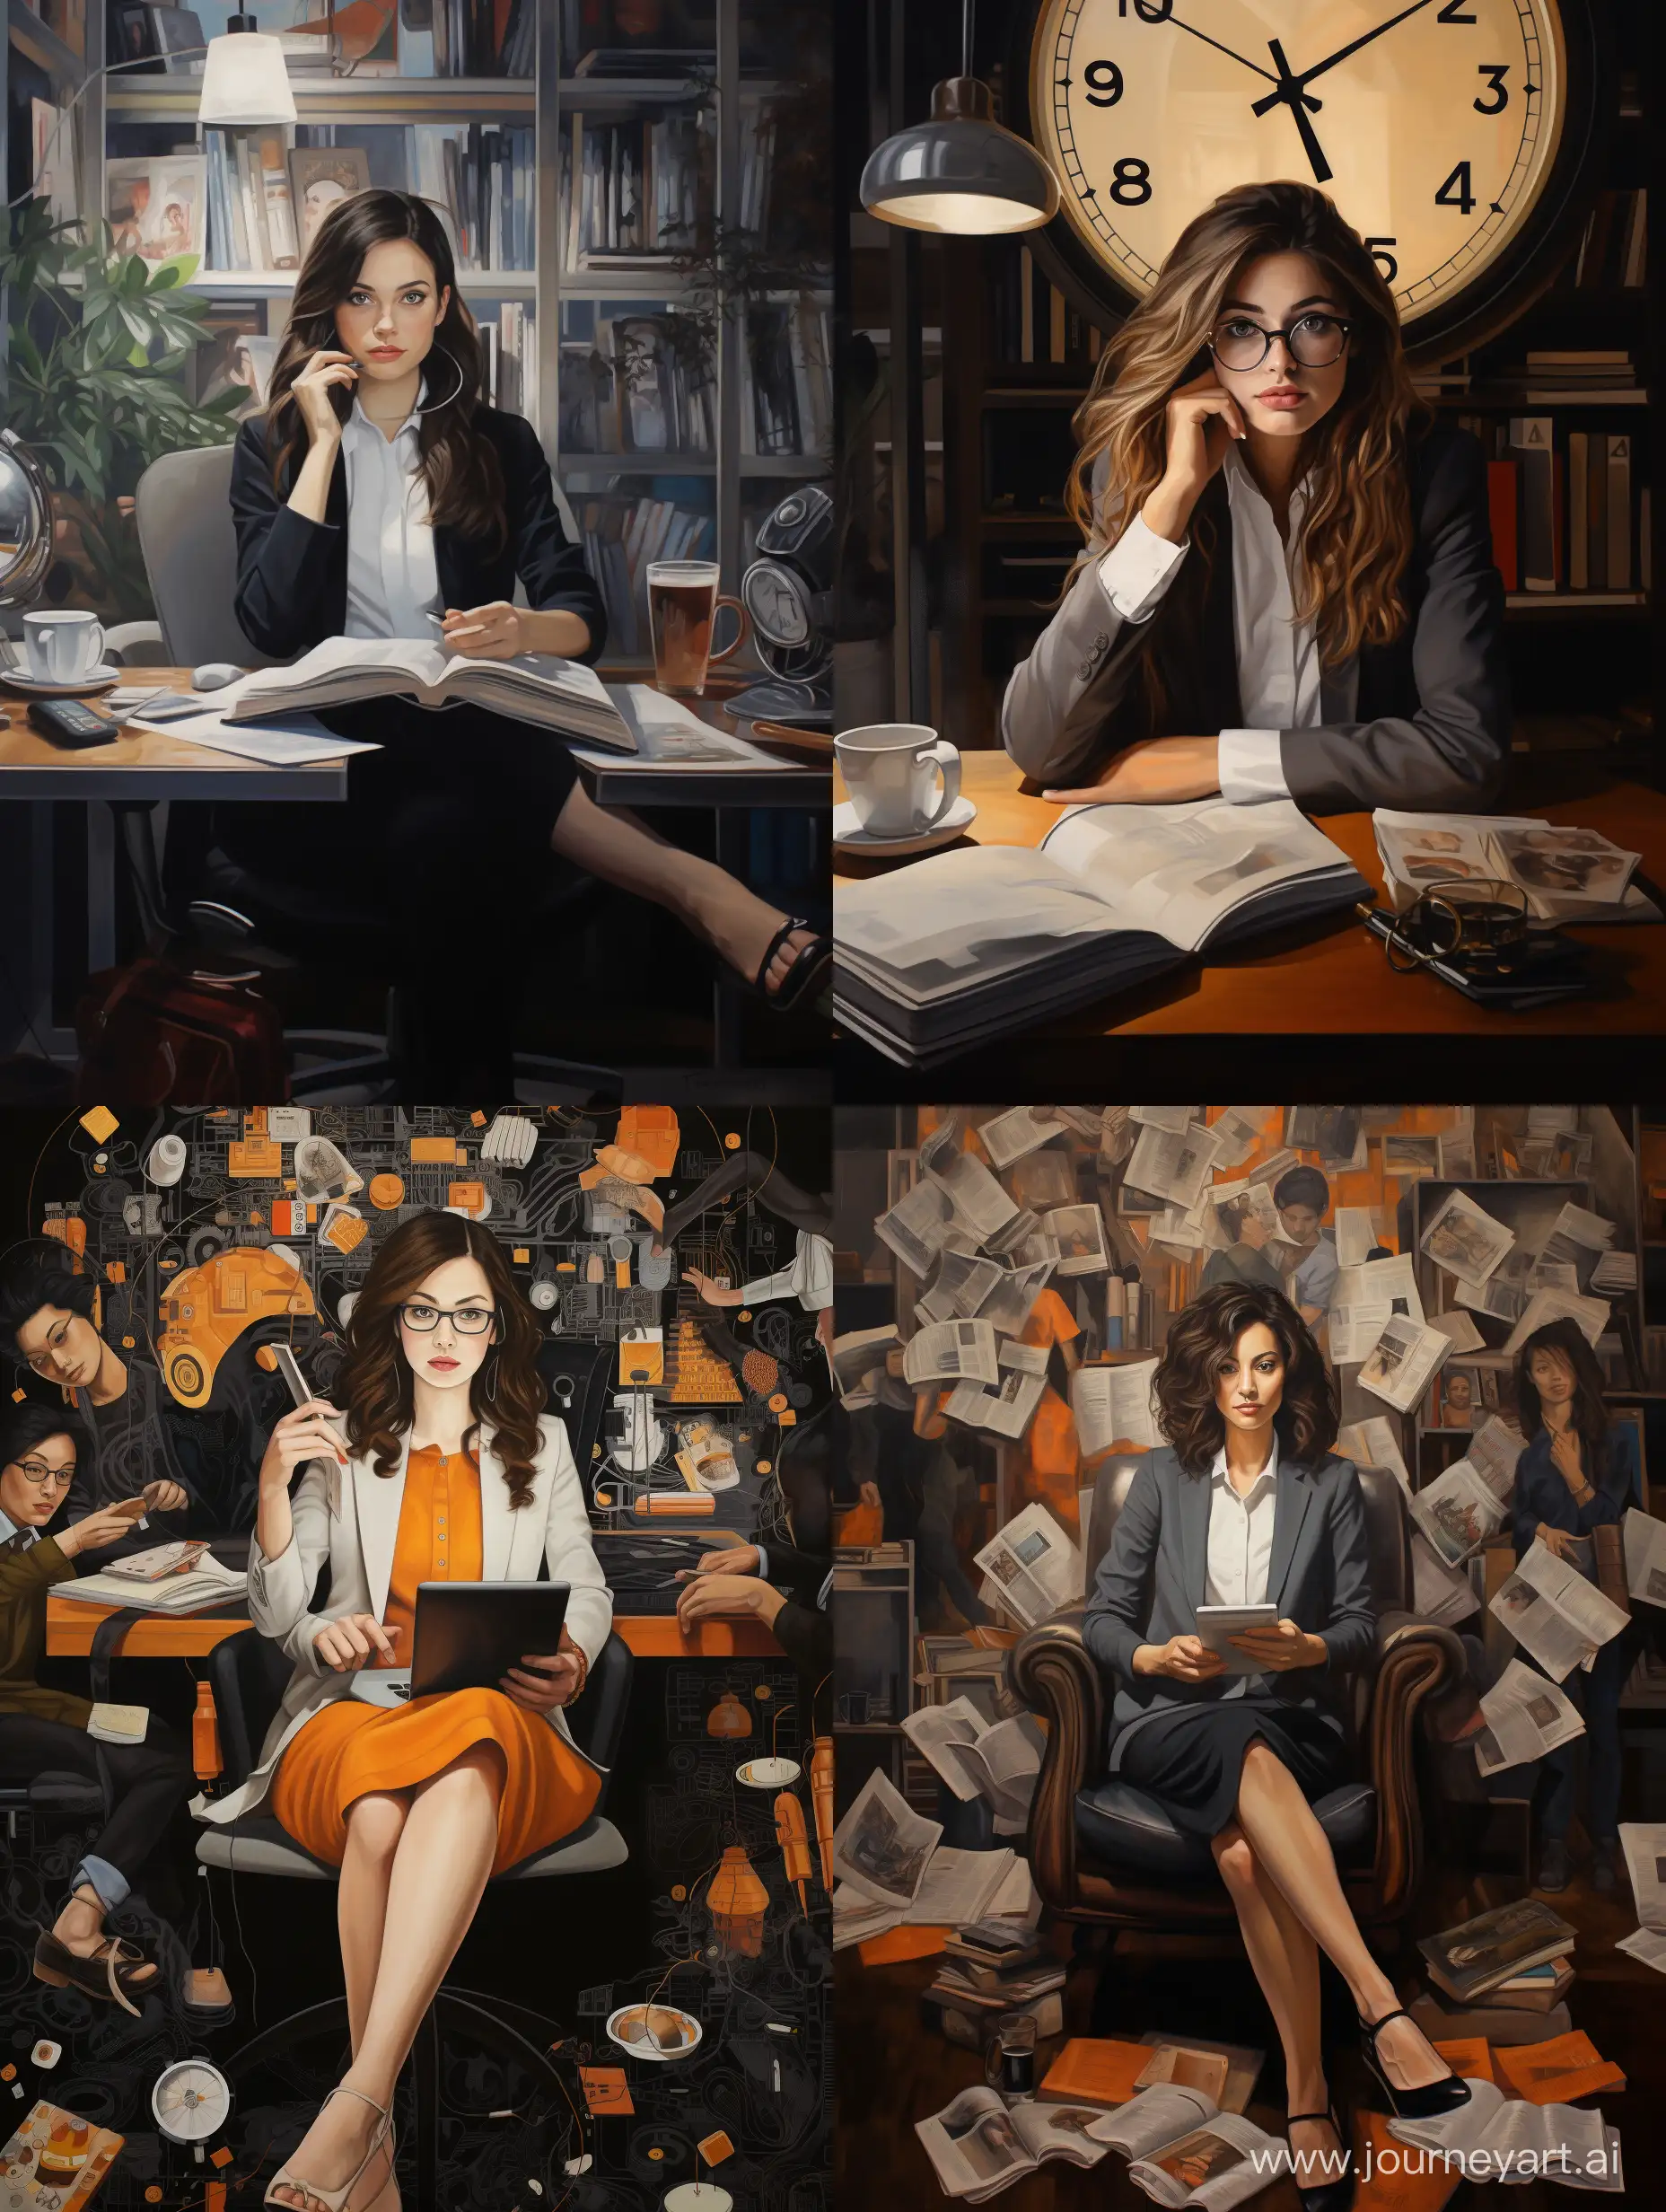 Professional-Women-in-an-Intellectual-Office-Setting